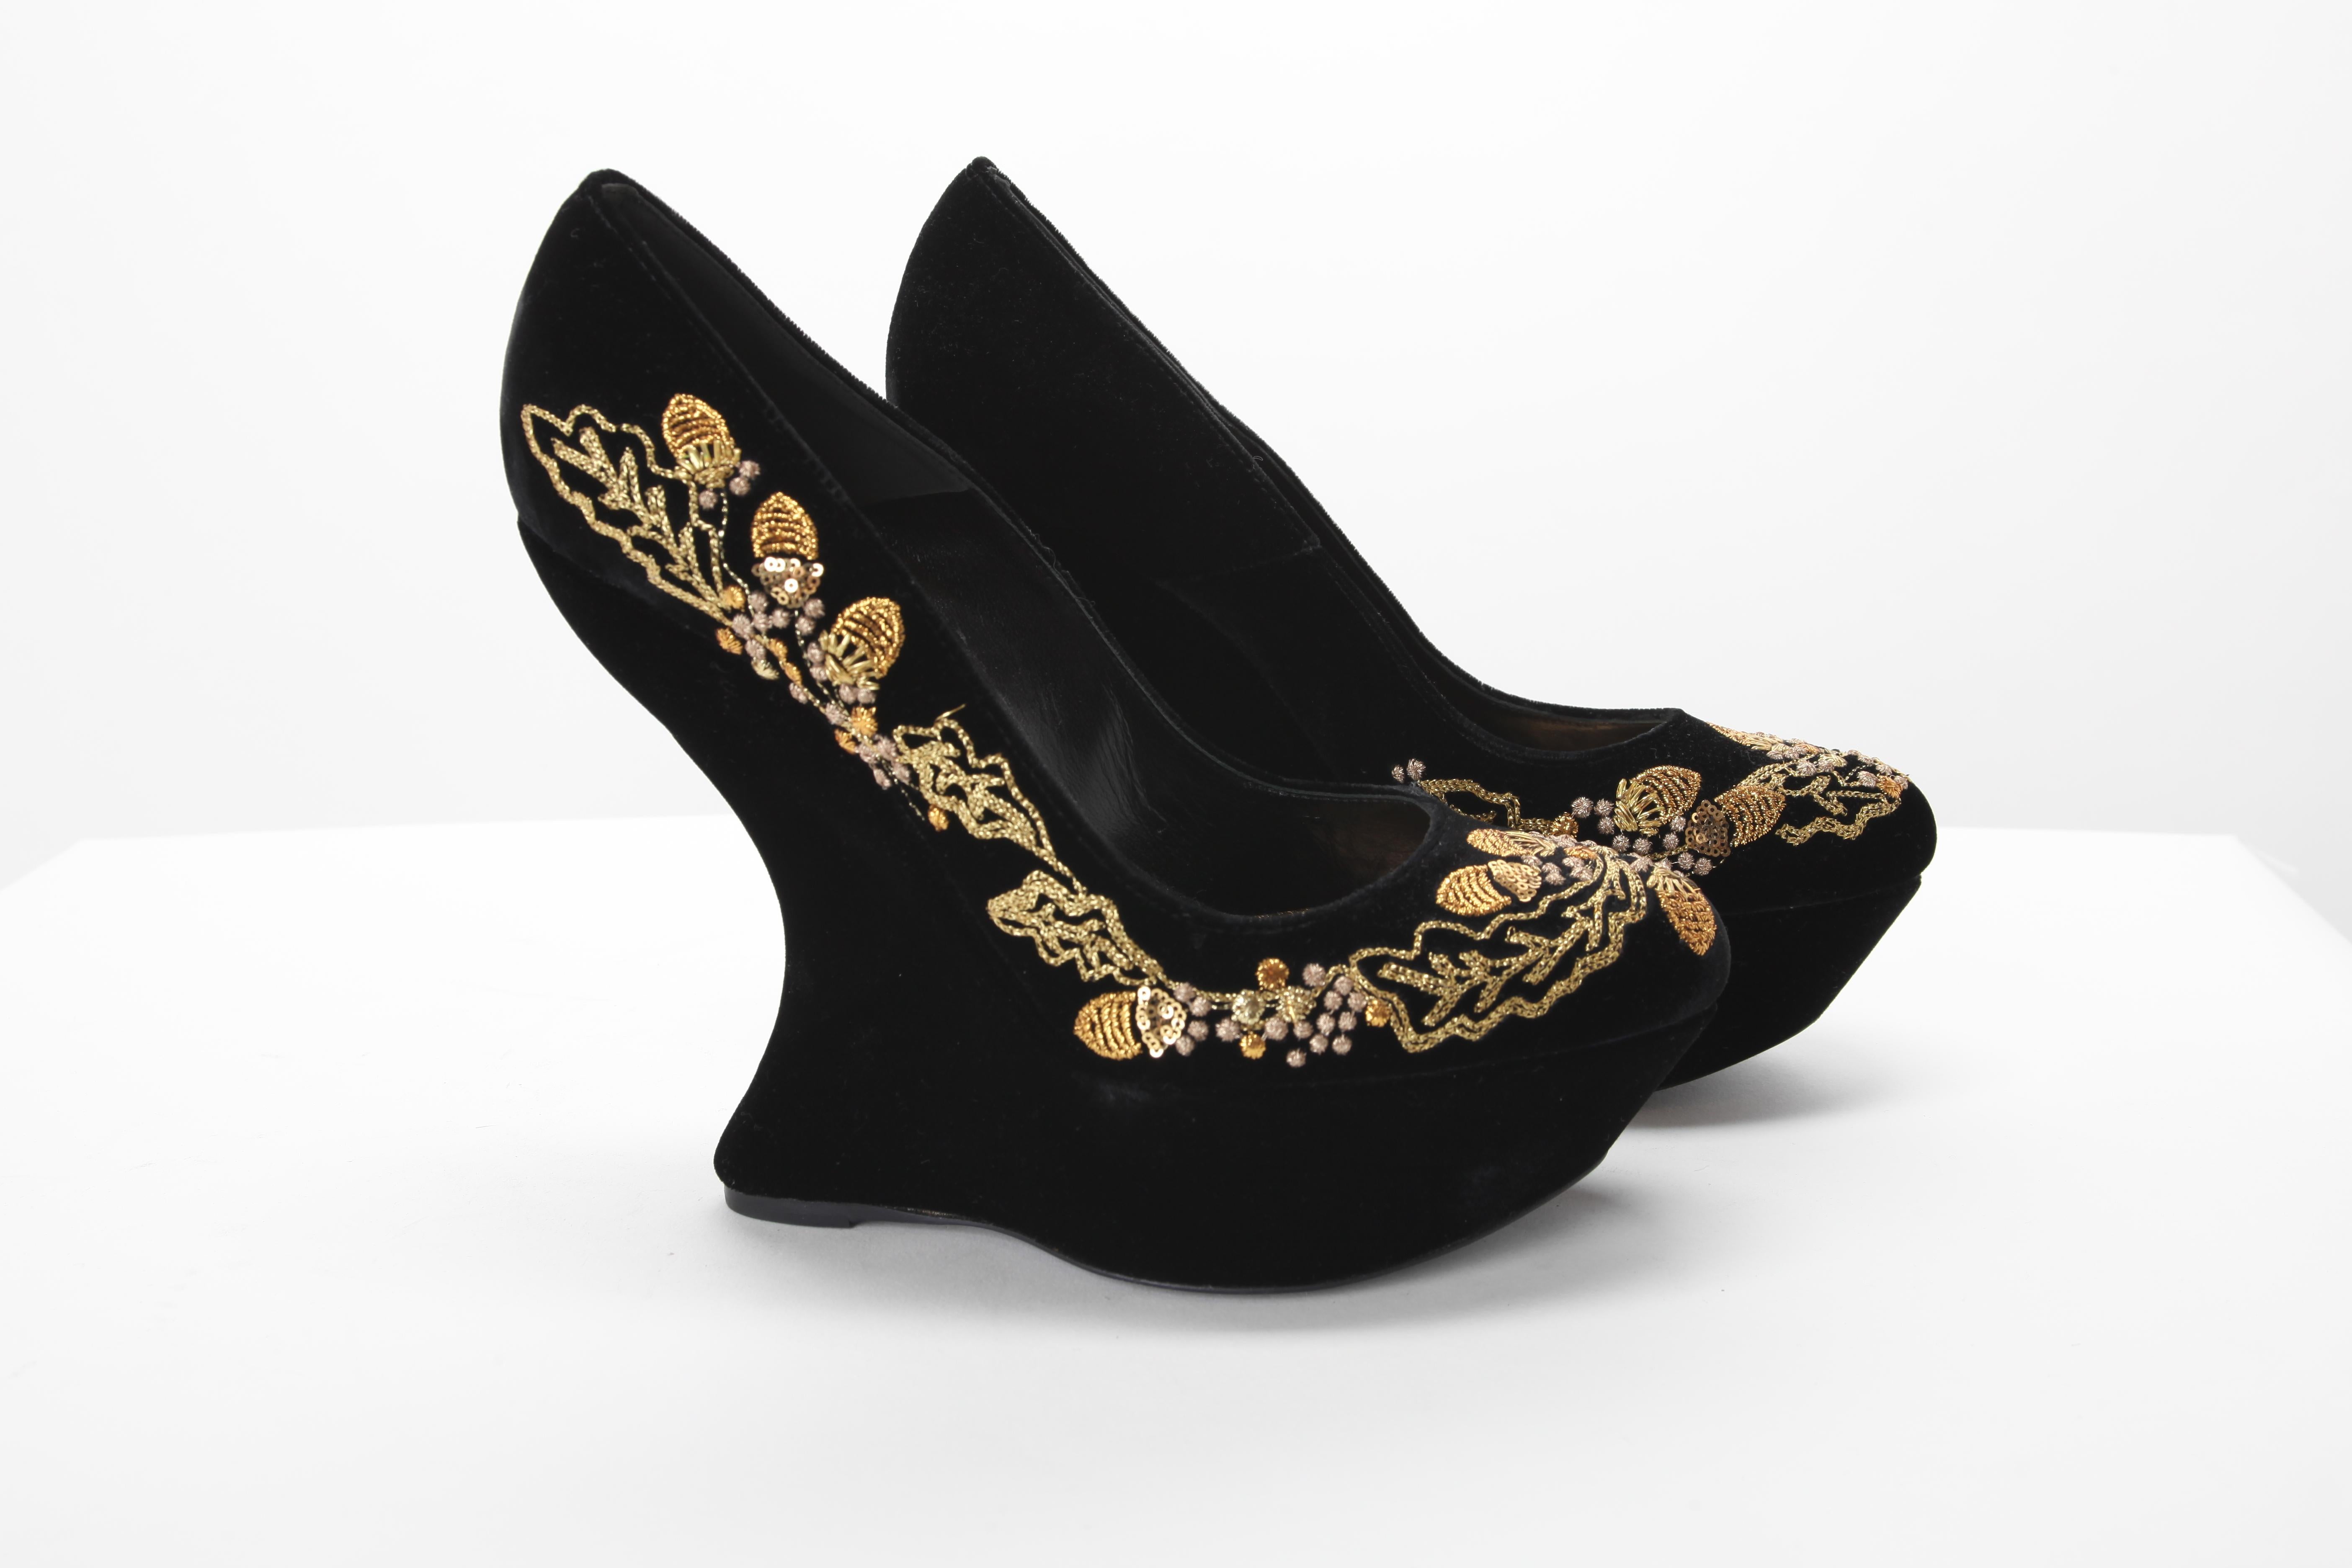 Alexander McQueen Black Velvet Embroidered Armadillo Curved Wedge Pumps Size 40 Condition is new without original box.